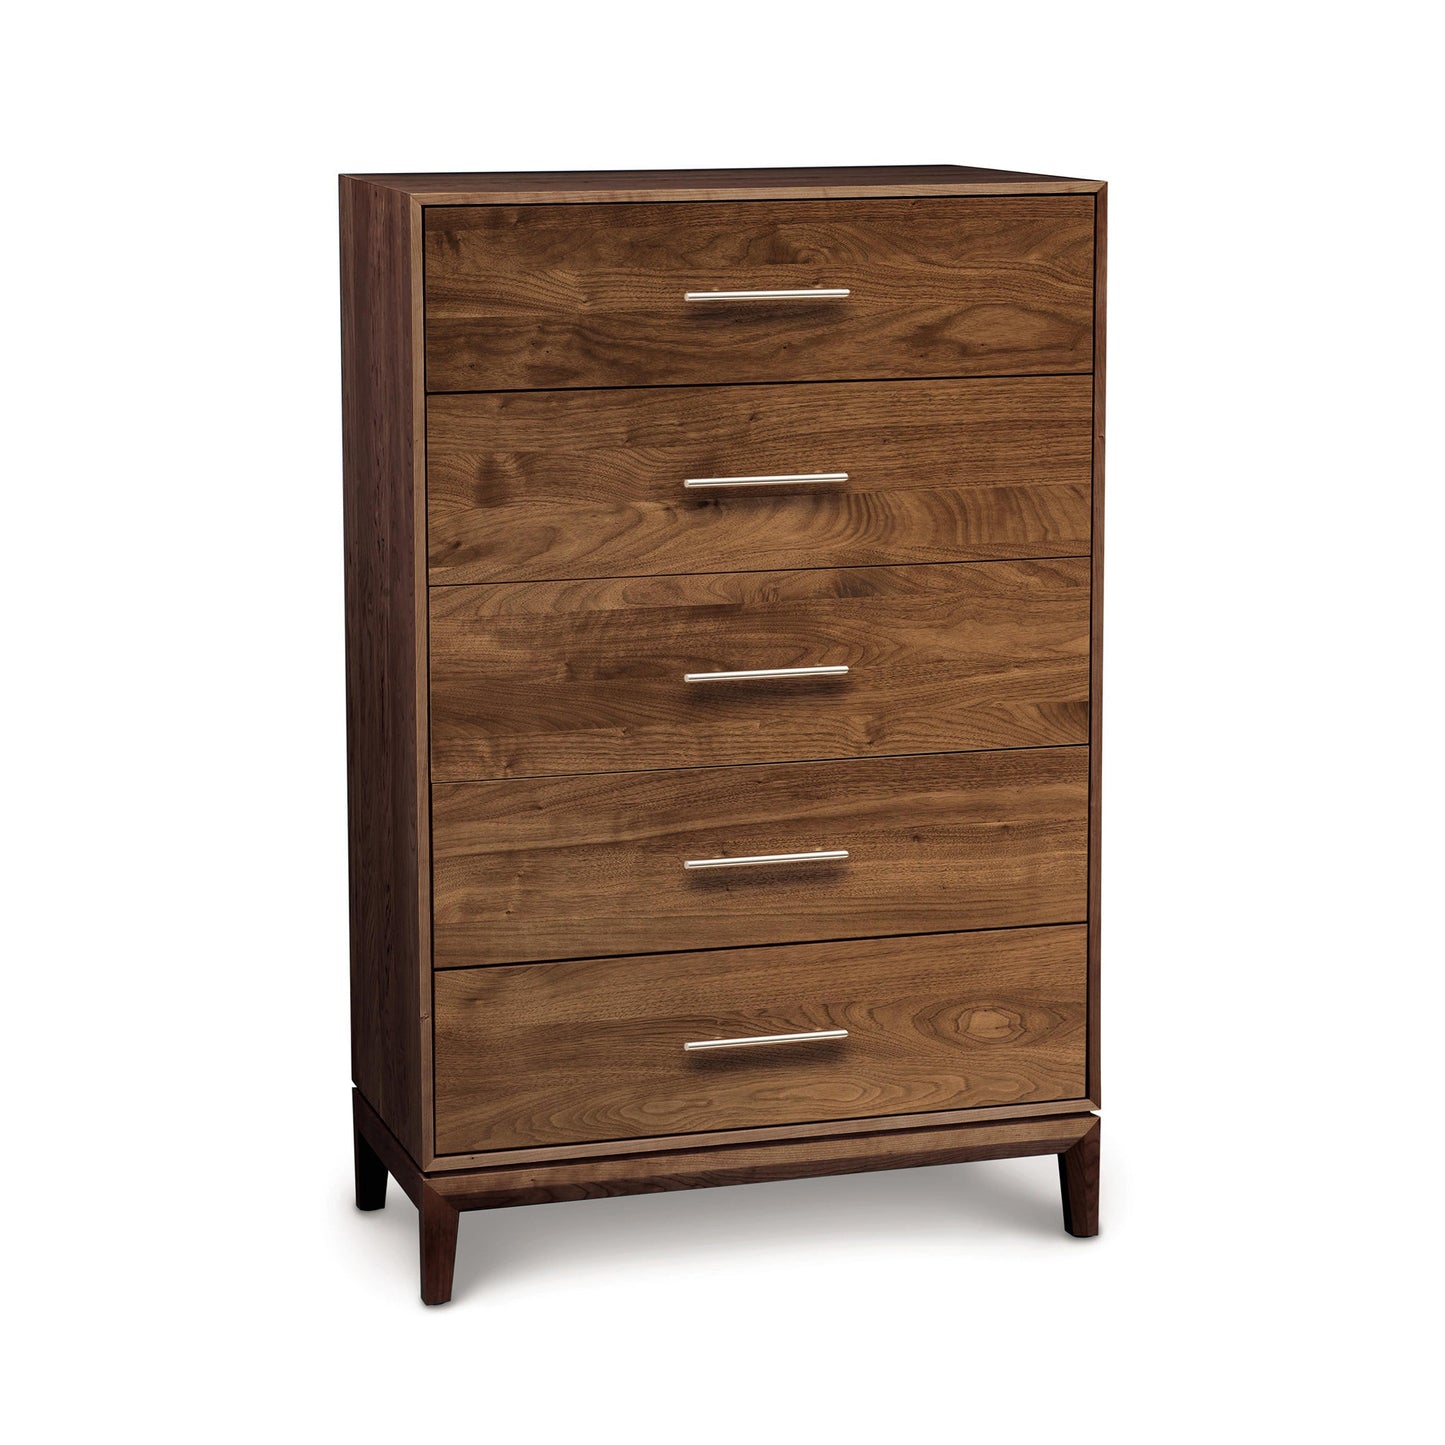 An image of a chest of drawers.